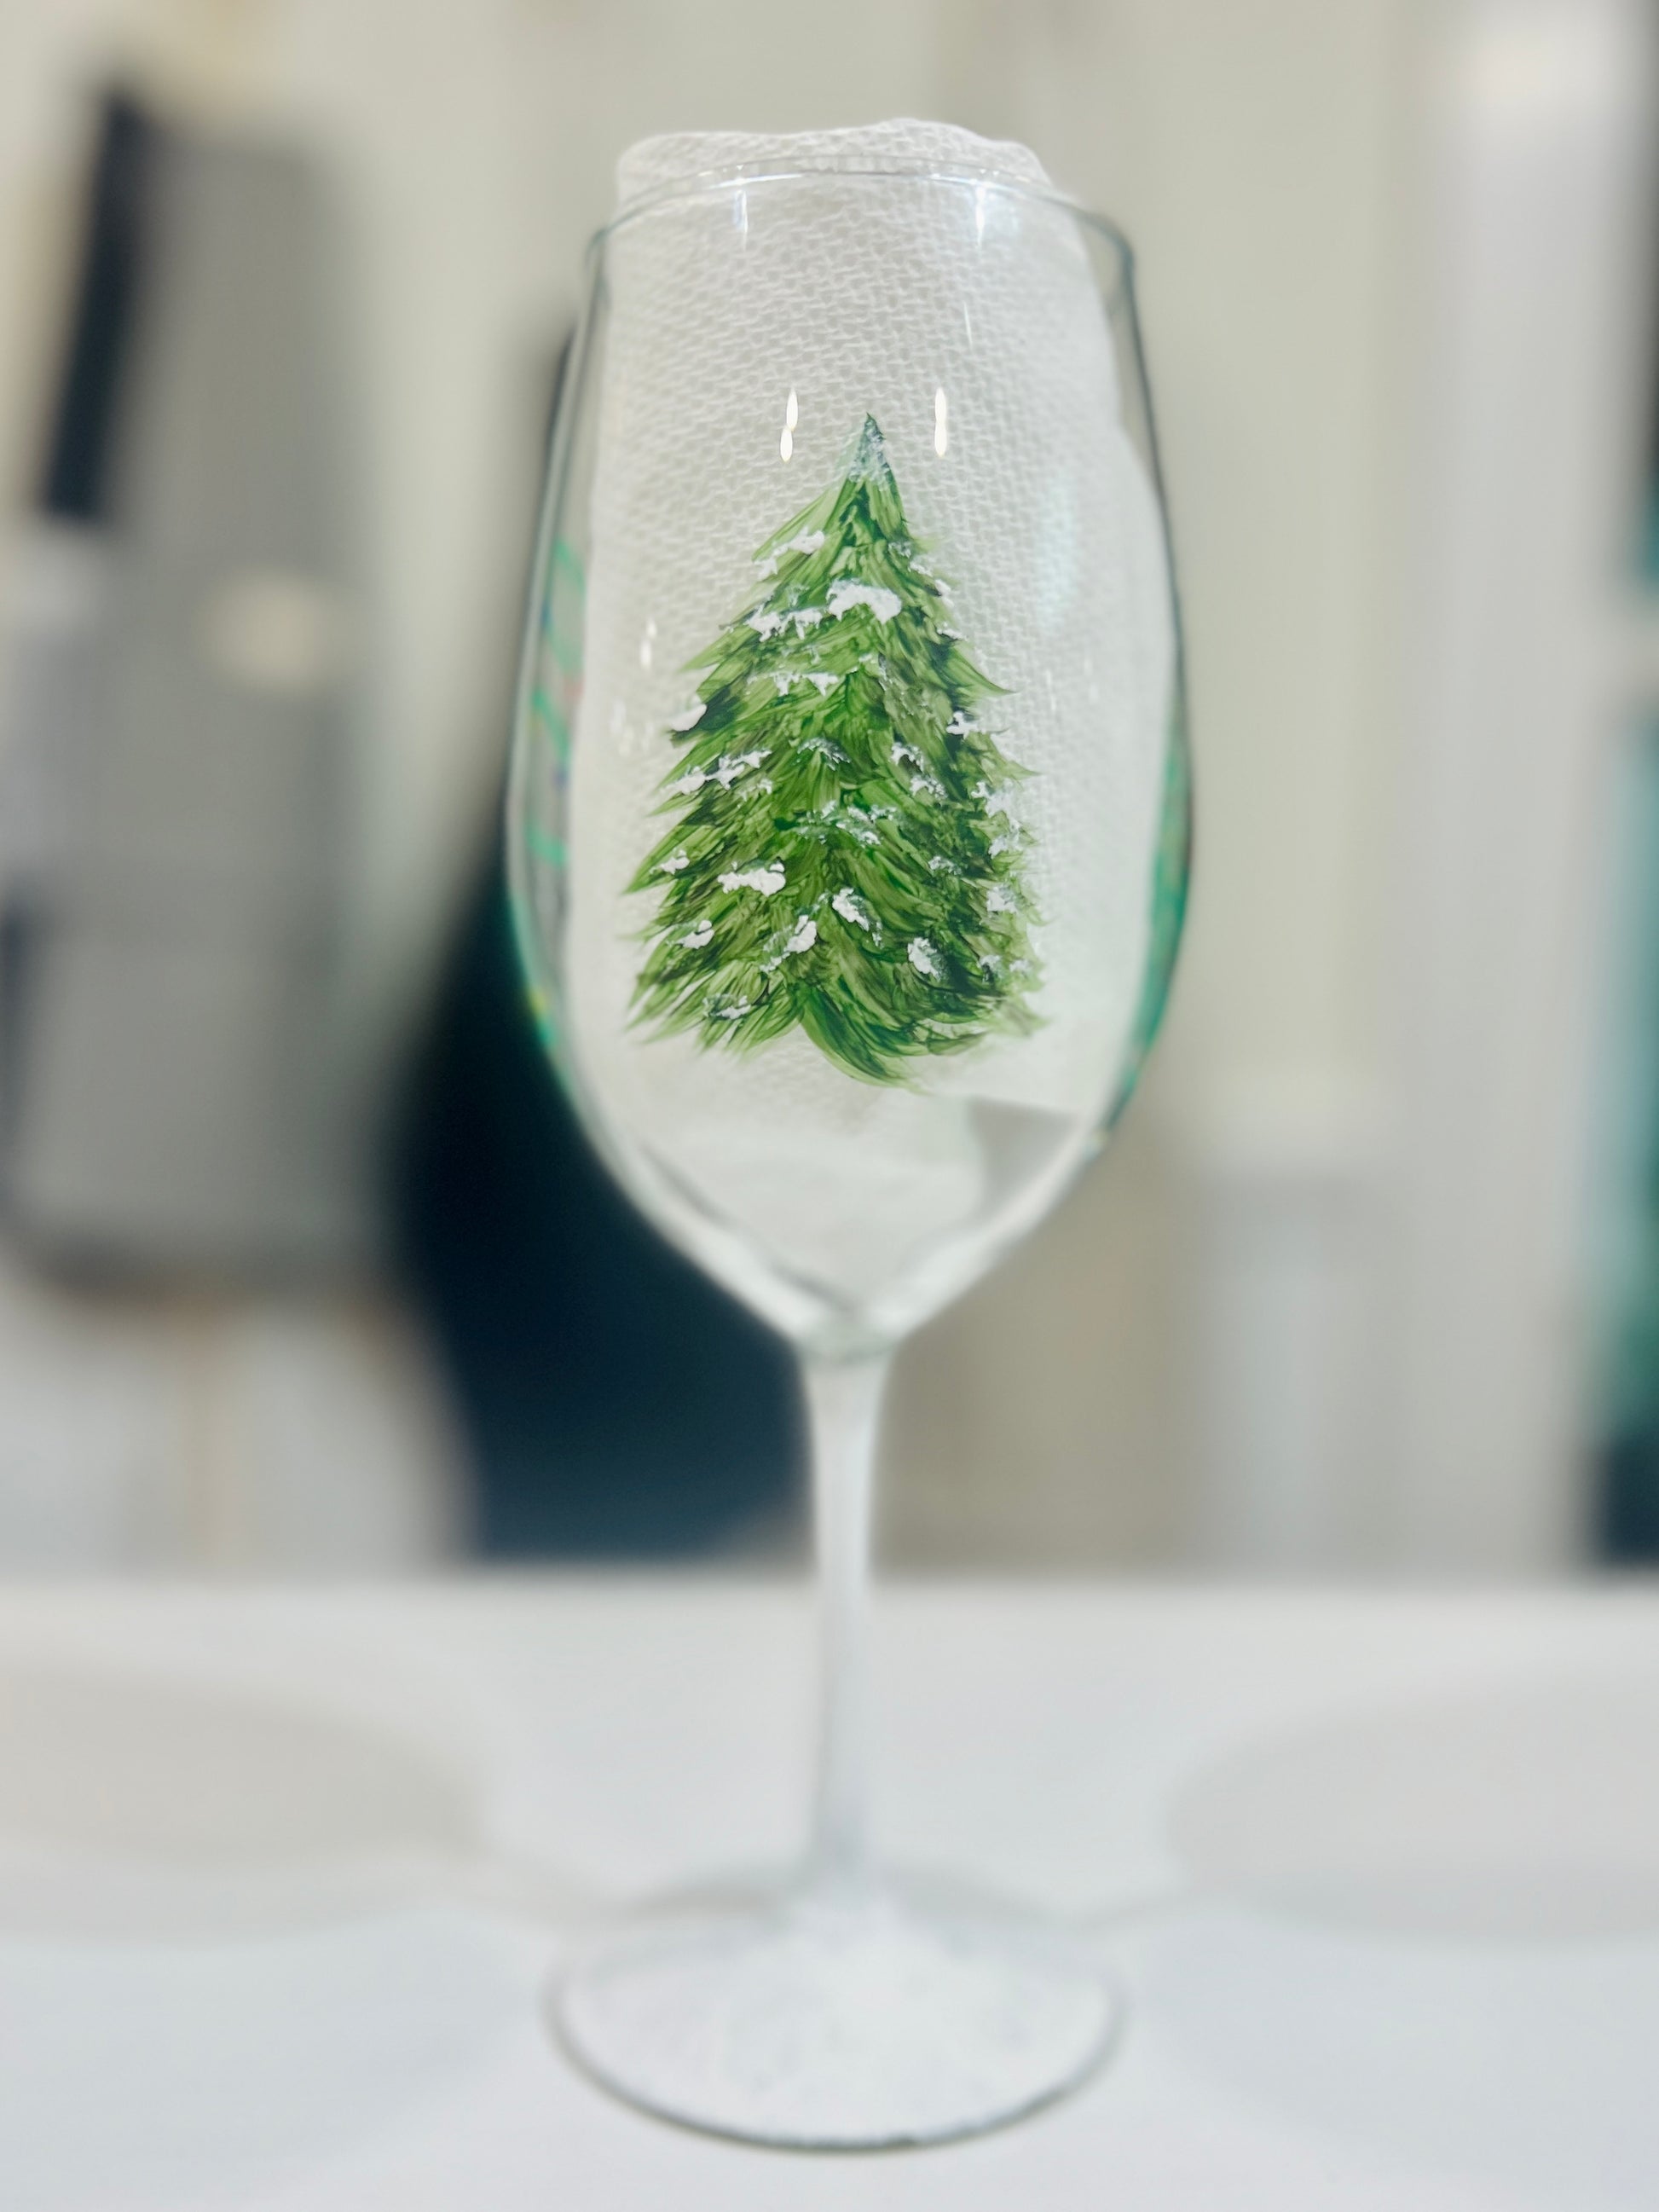 Gallery Glass Class: Easy, Breezy Gallery Glass for Christmas